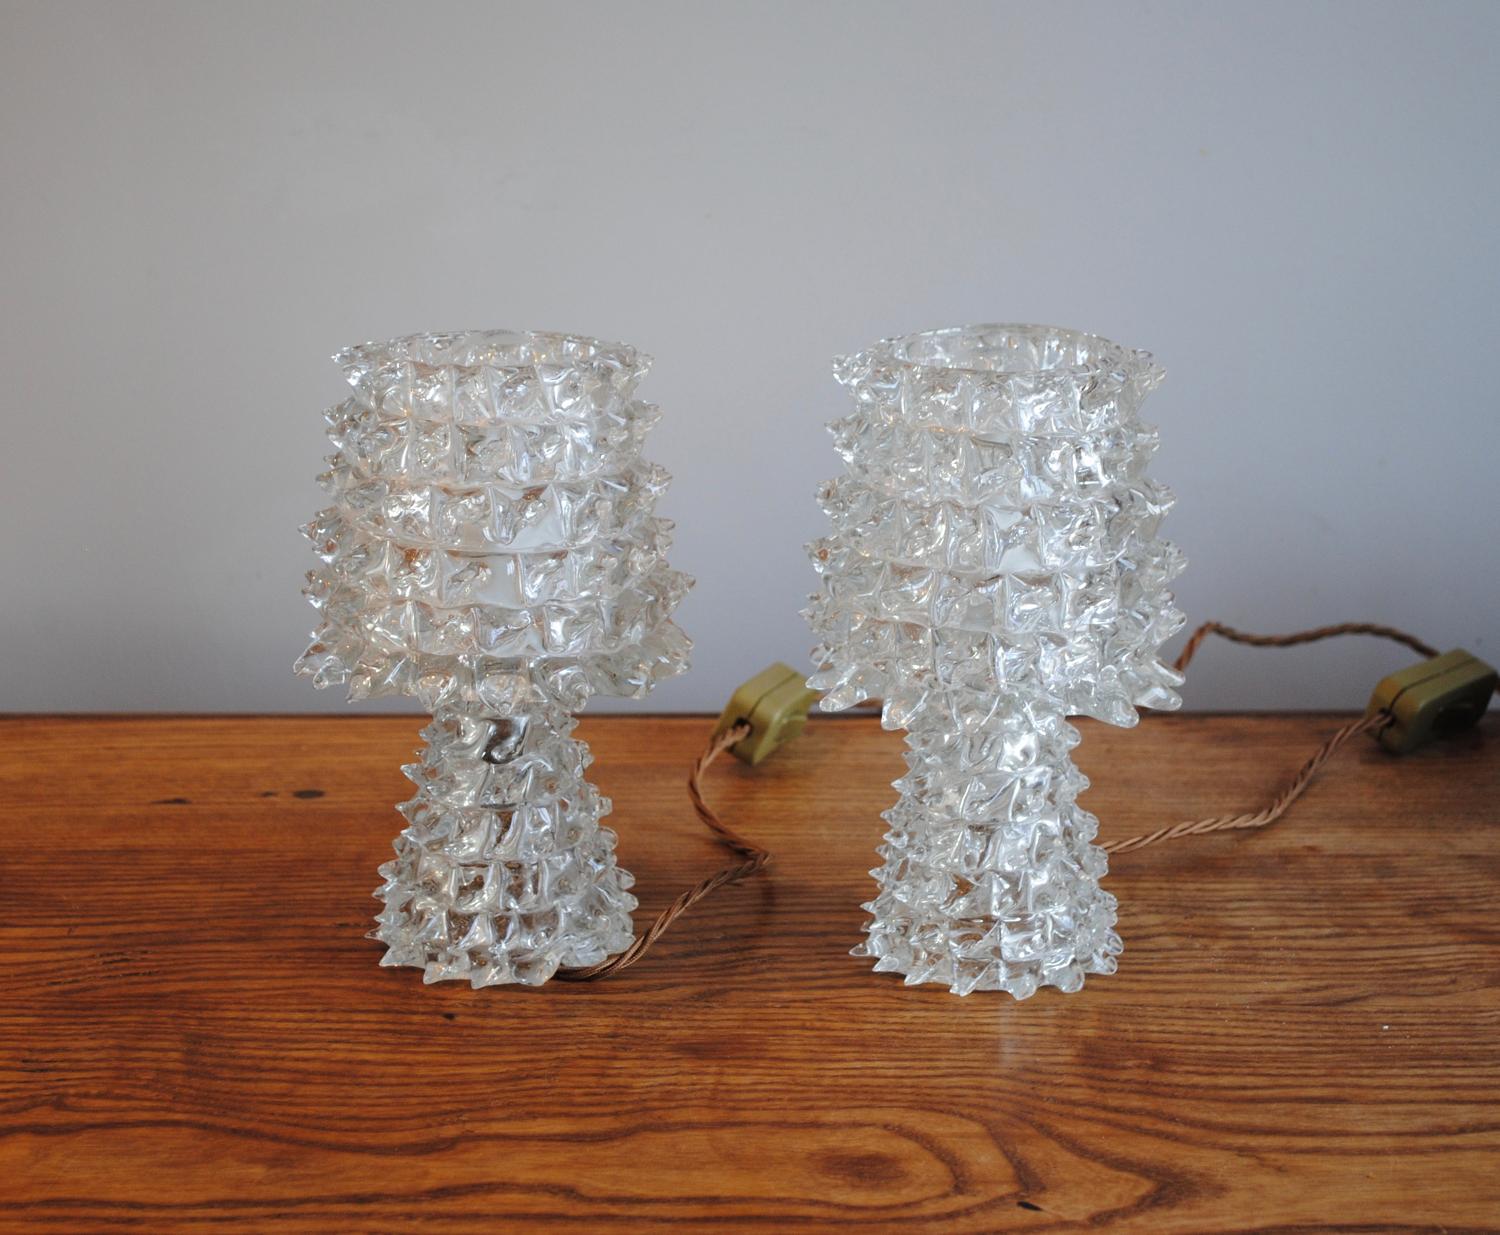 Pair of Barovier Table Lamps